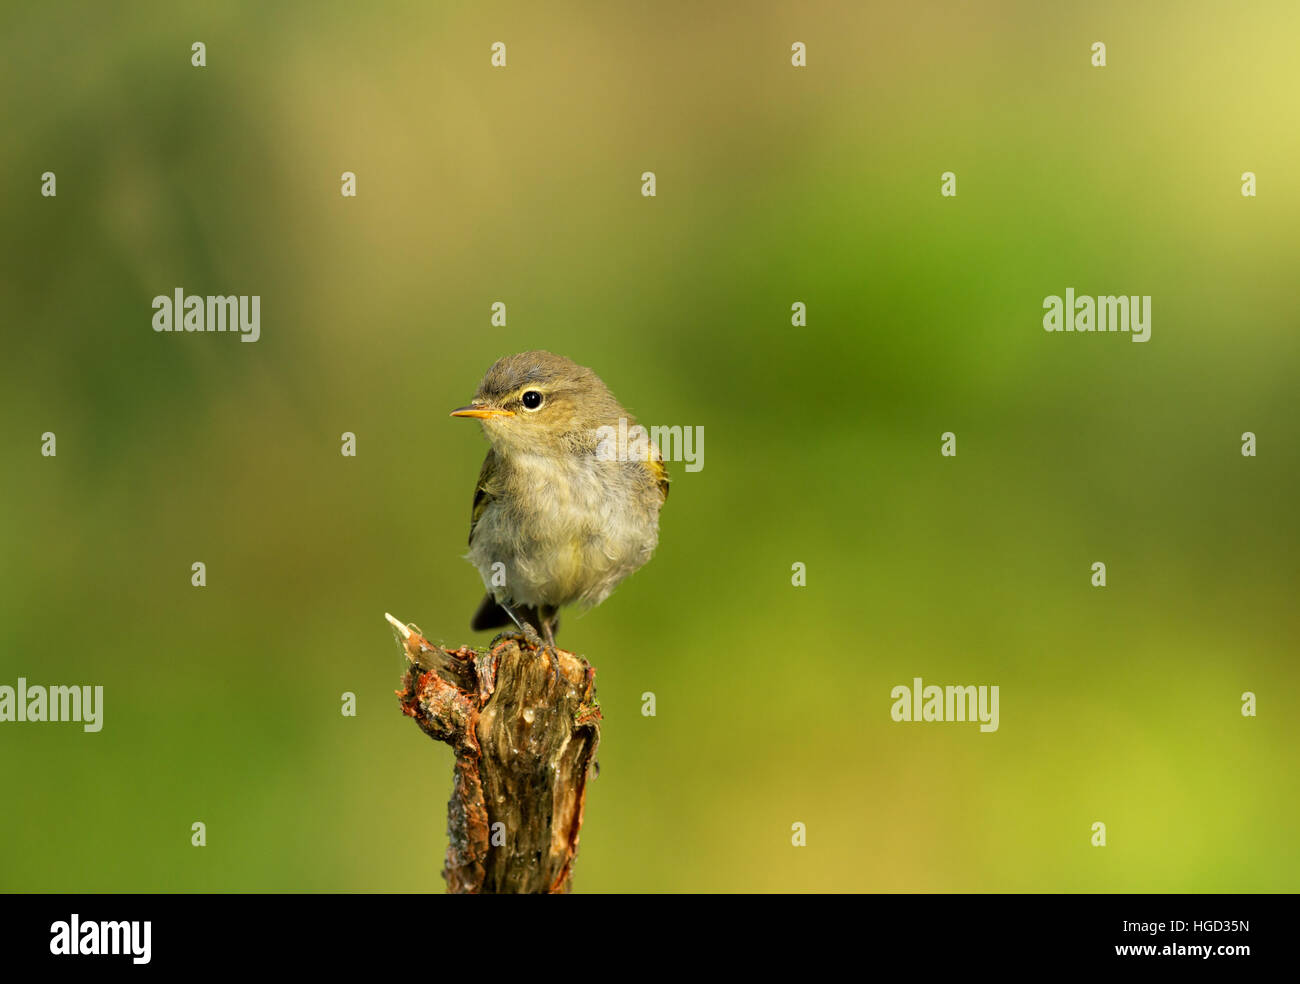 Wood warbler (Phylloscopus sibilatrix) summer, sitting on a branch on a green background of foliage of trees with shallow depth of field.Horizontal vi Stock Photo